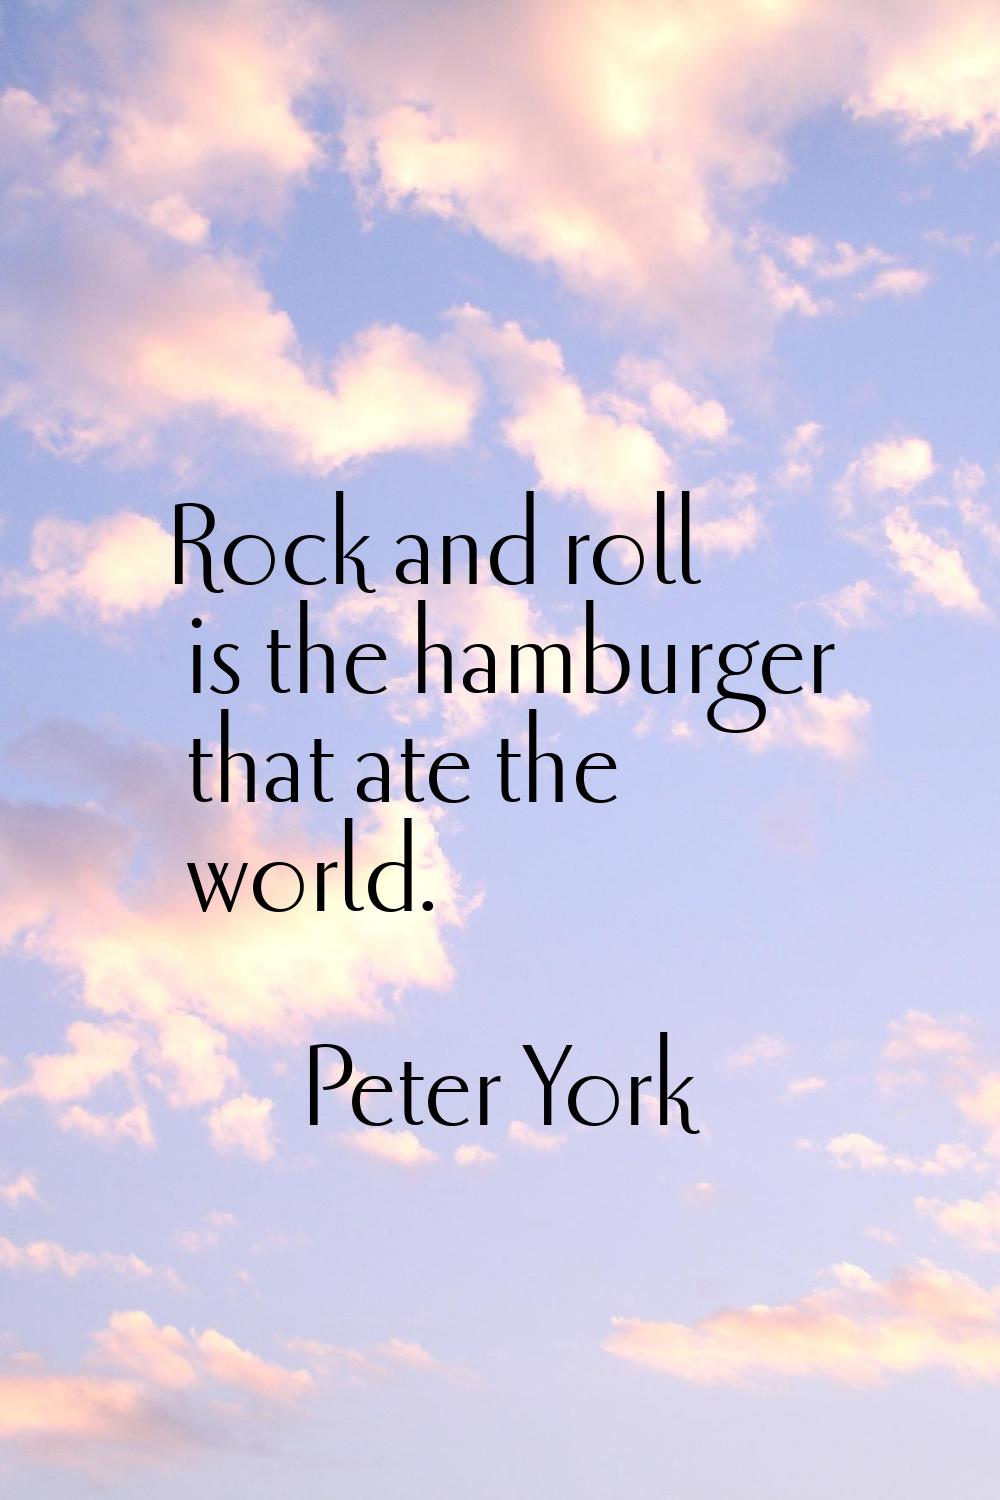 Rock and roll is the hamburger that ate the world.